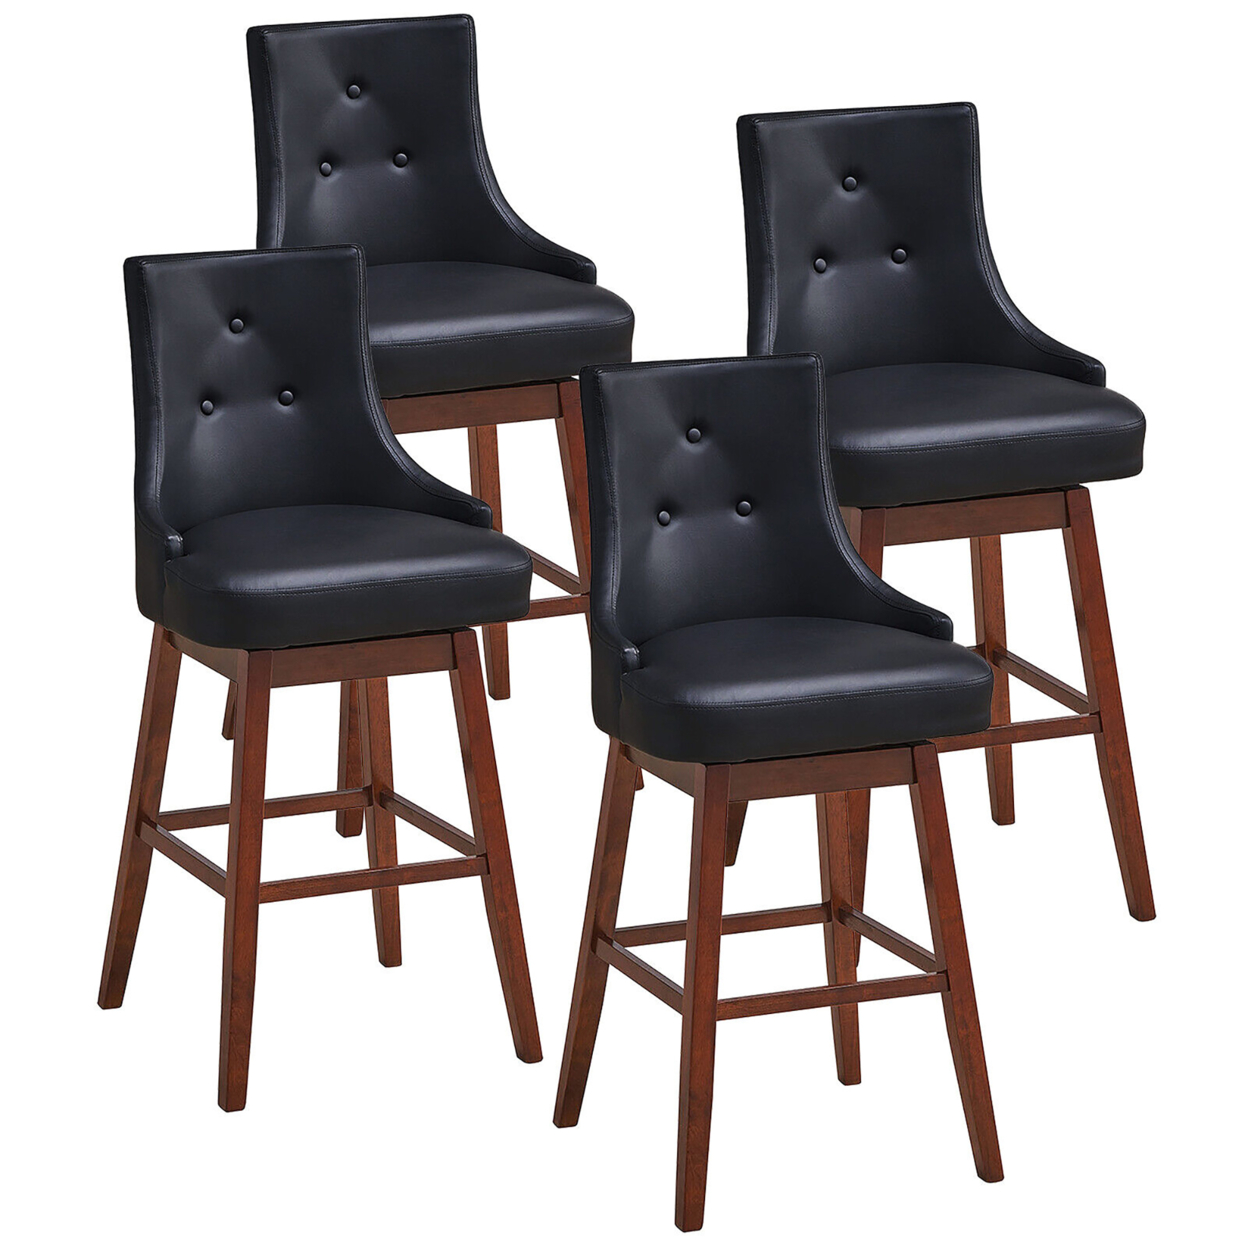 Set Of 4 Swivel Bar Stools 29'' Pub Height Upholstered Chairs W/ Rubber Wood Legs